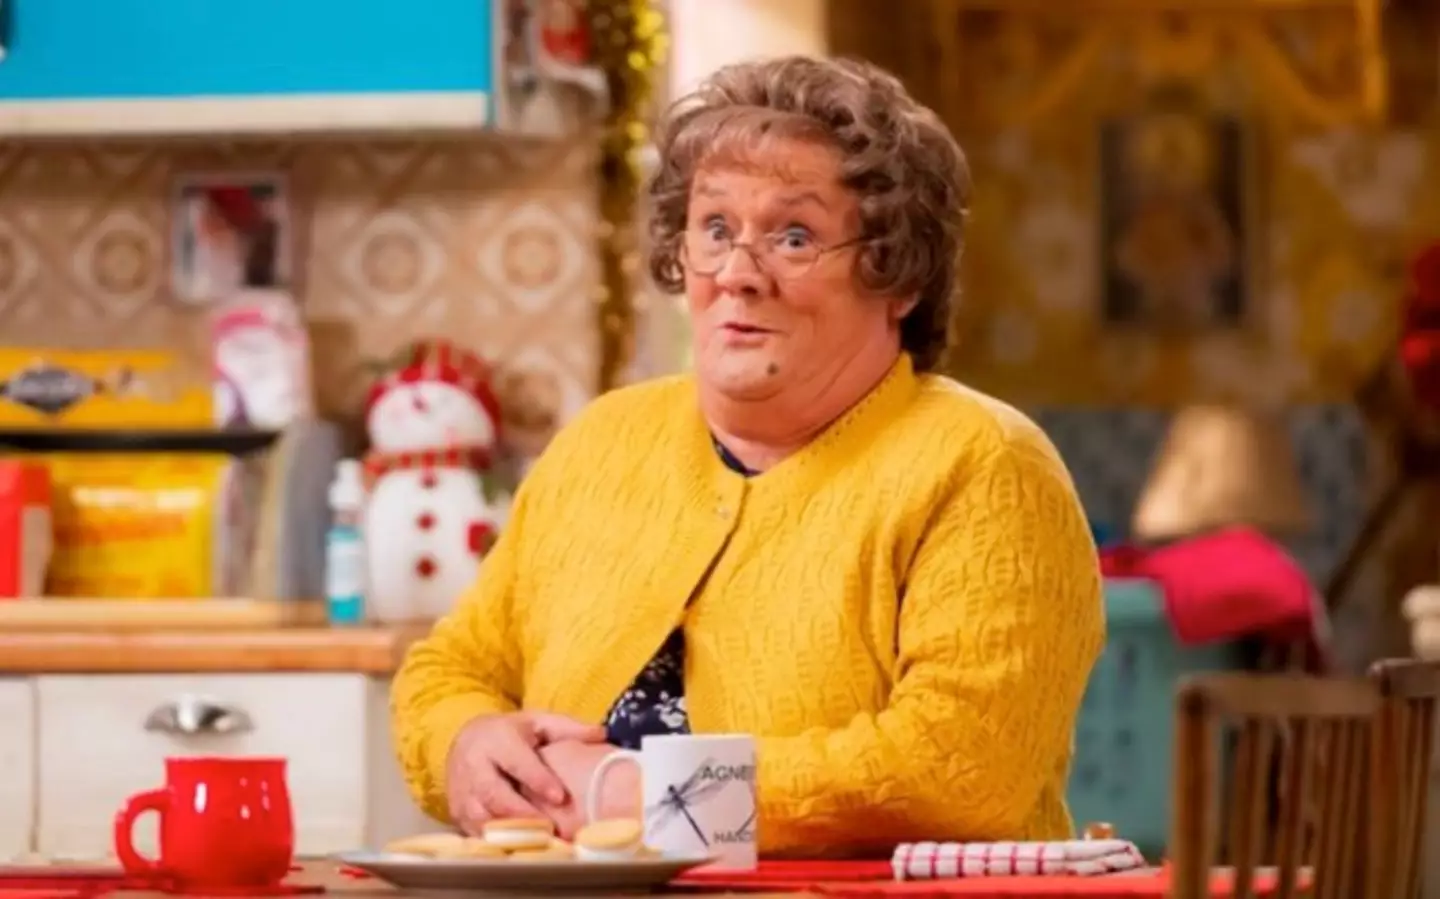 Viewers have called for Mrs Brown's Boys to be cancelled.